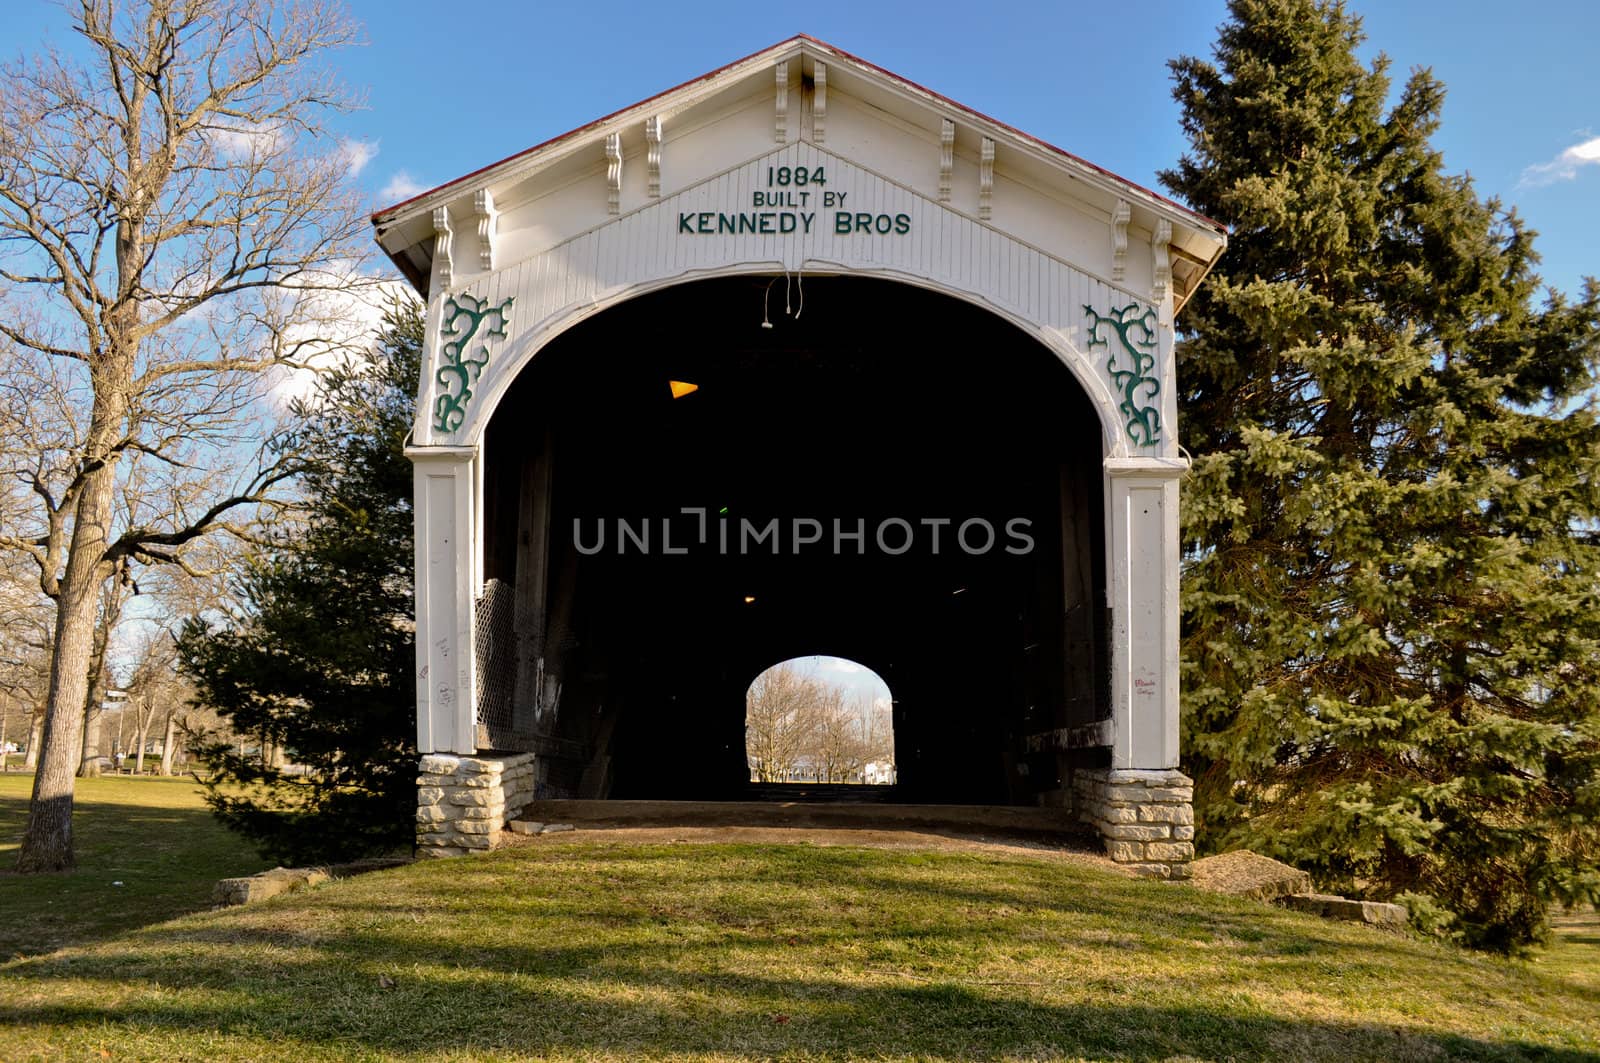 Kennedy Bros Covered Bridge Connersville Indiana by RefocusPhoto